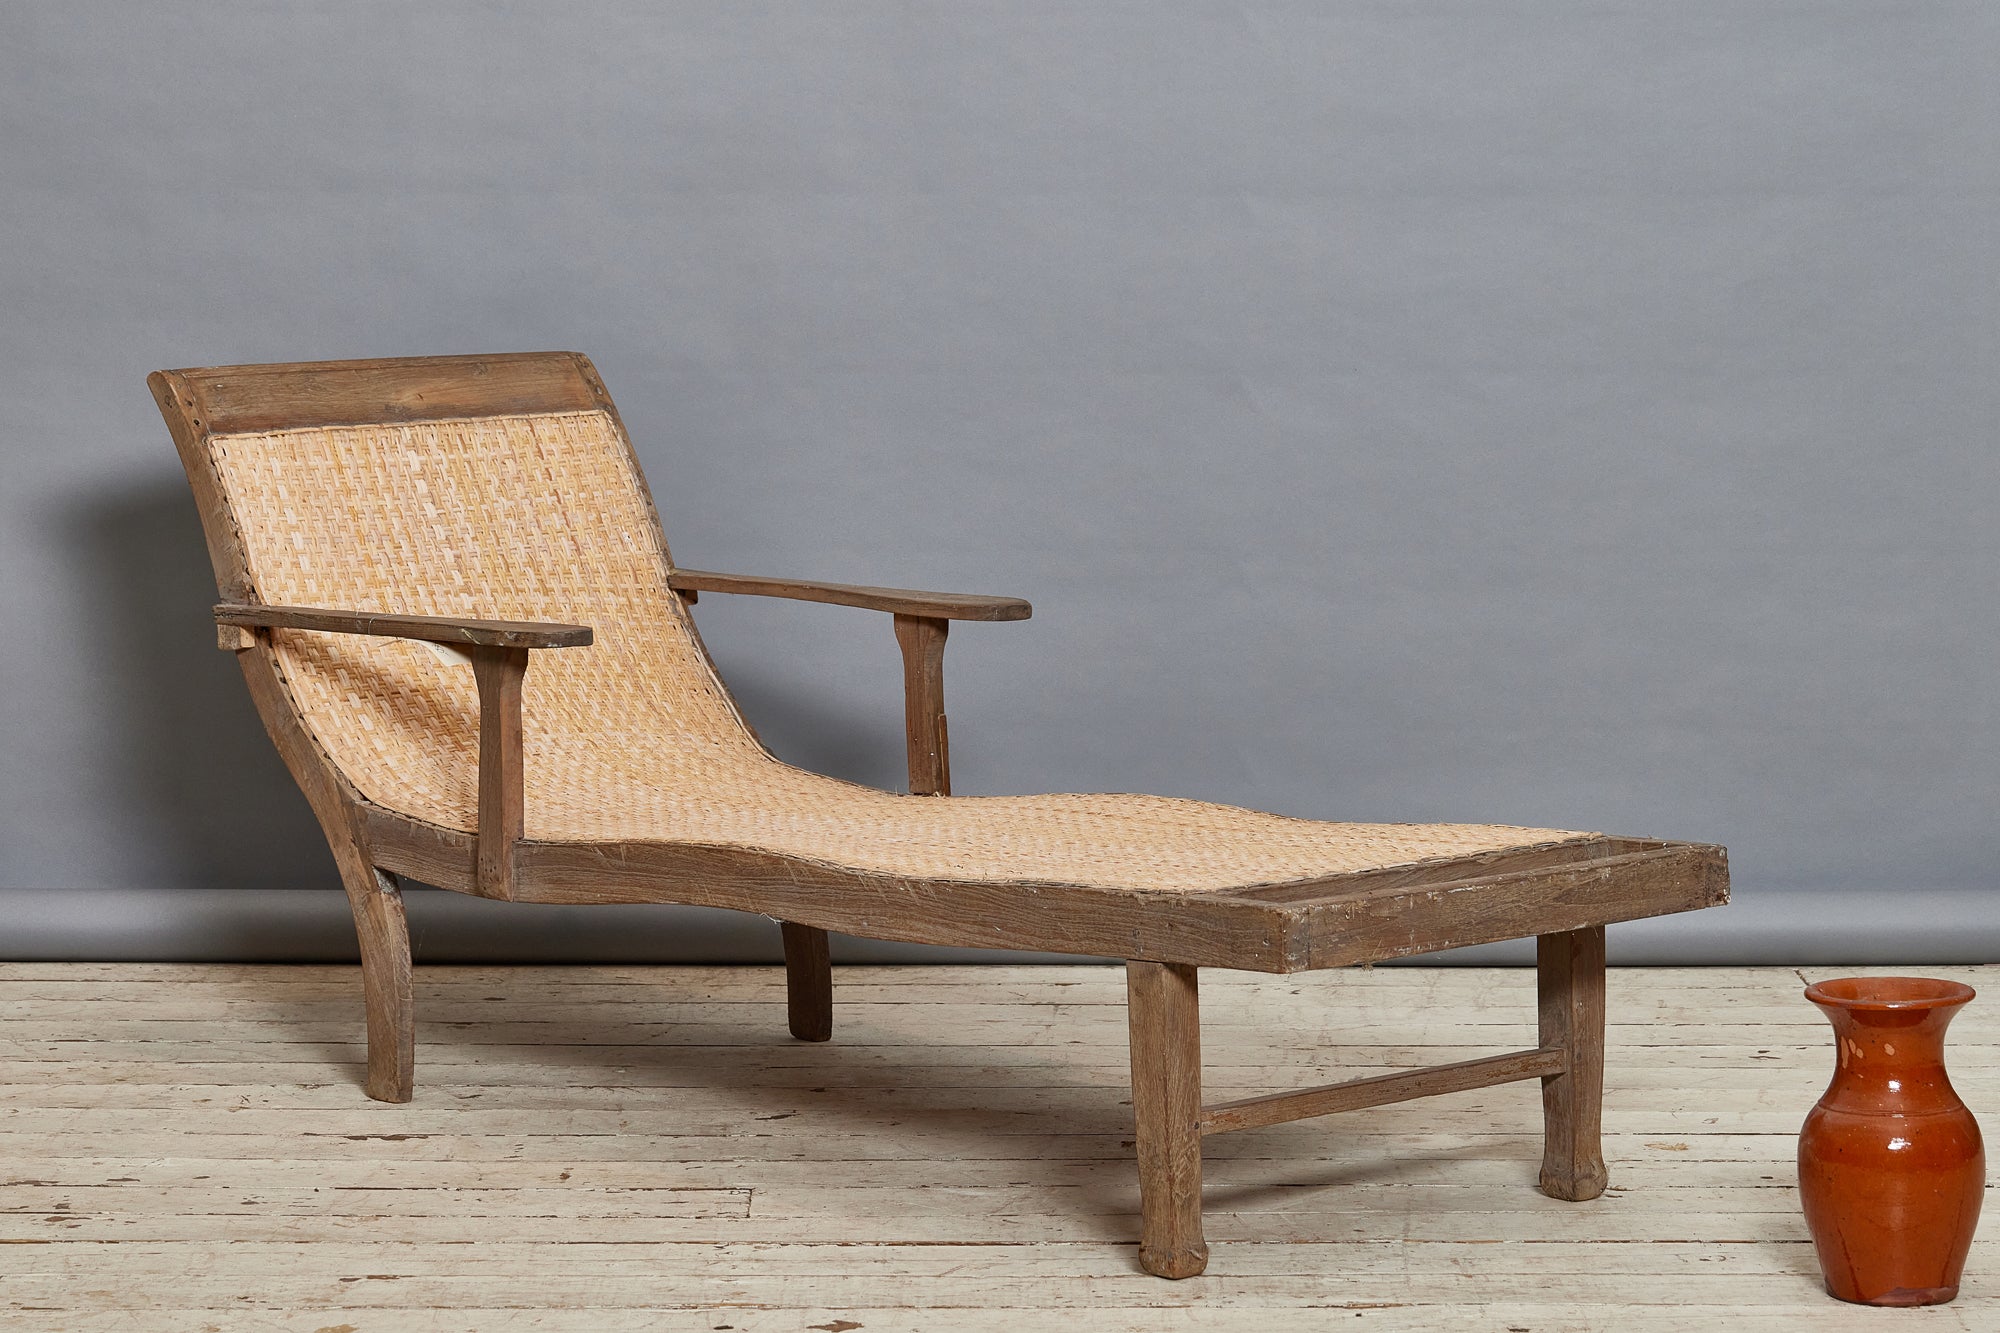 Early Dutch Colonial Teak Chaise with Woven Rattan Seat